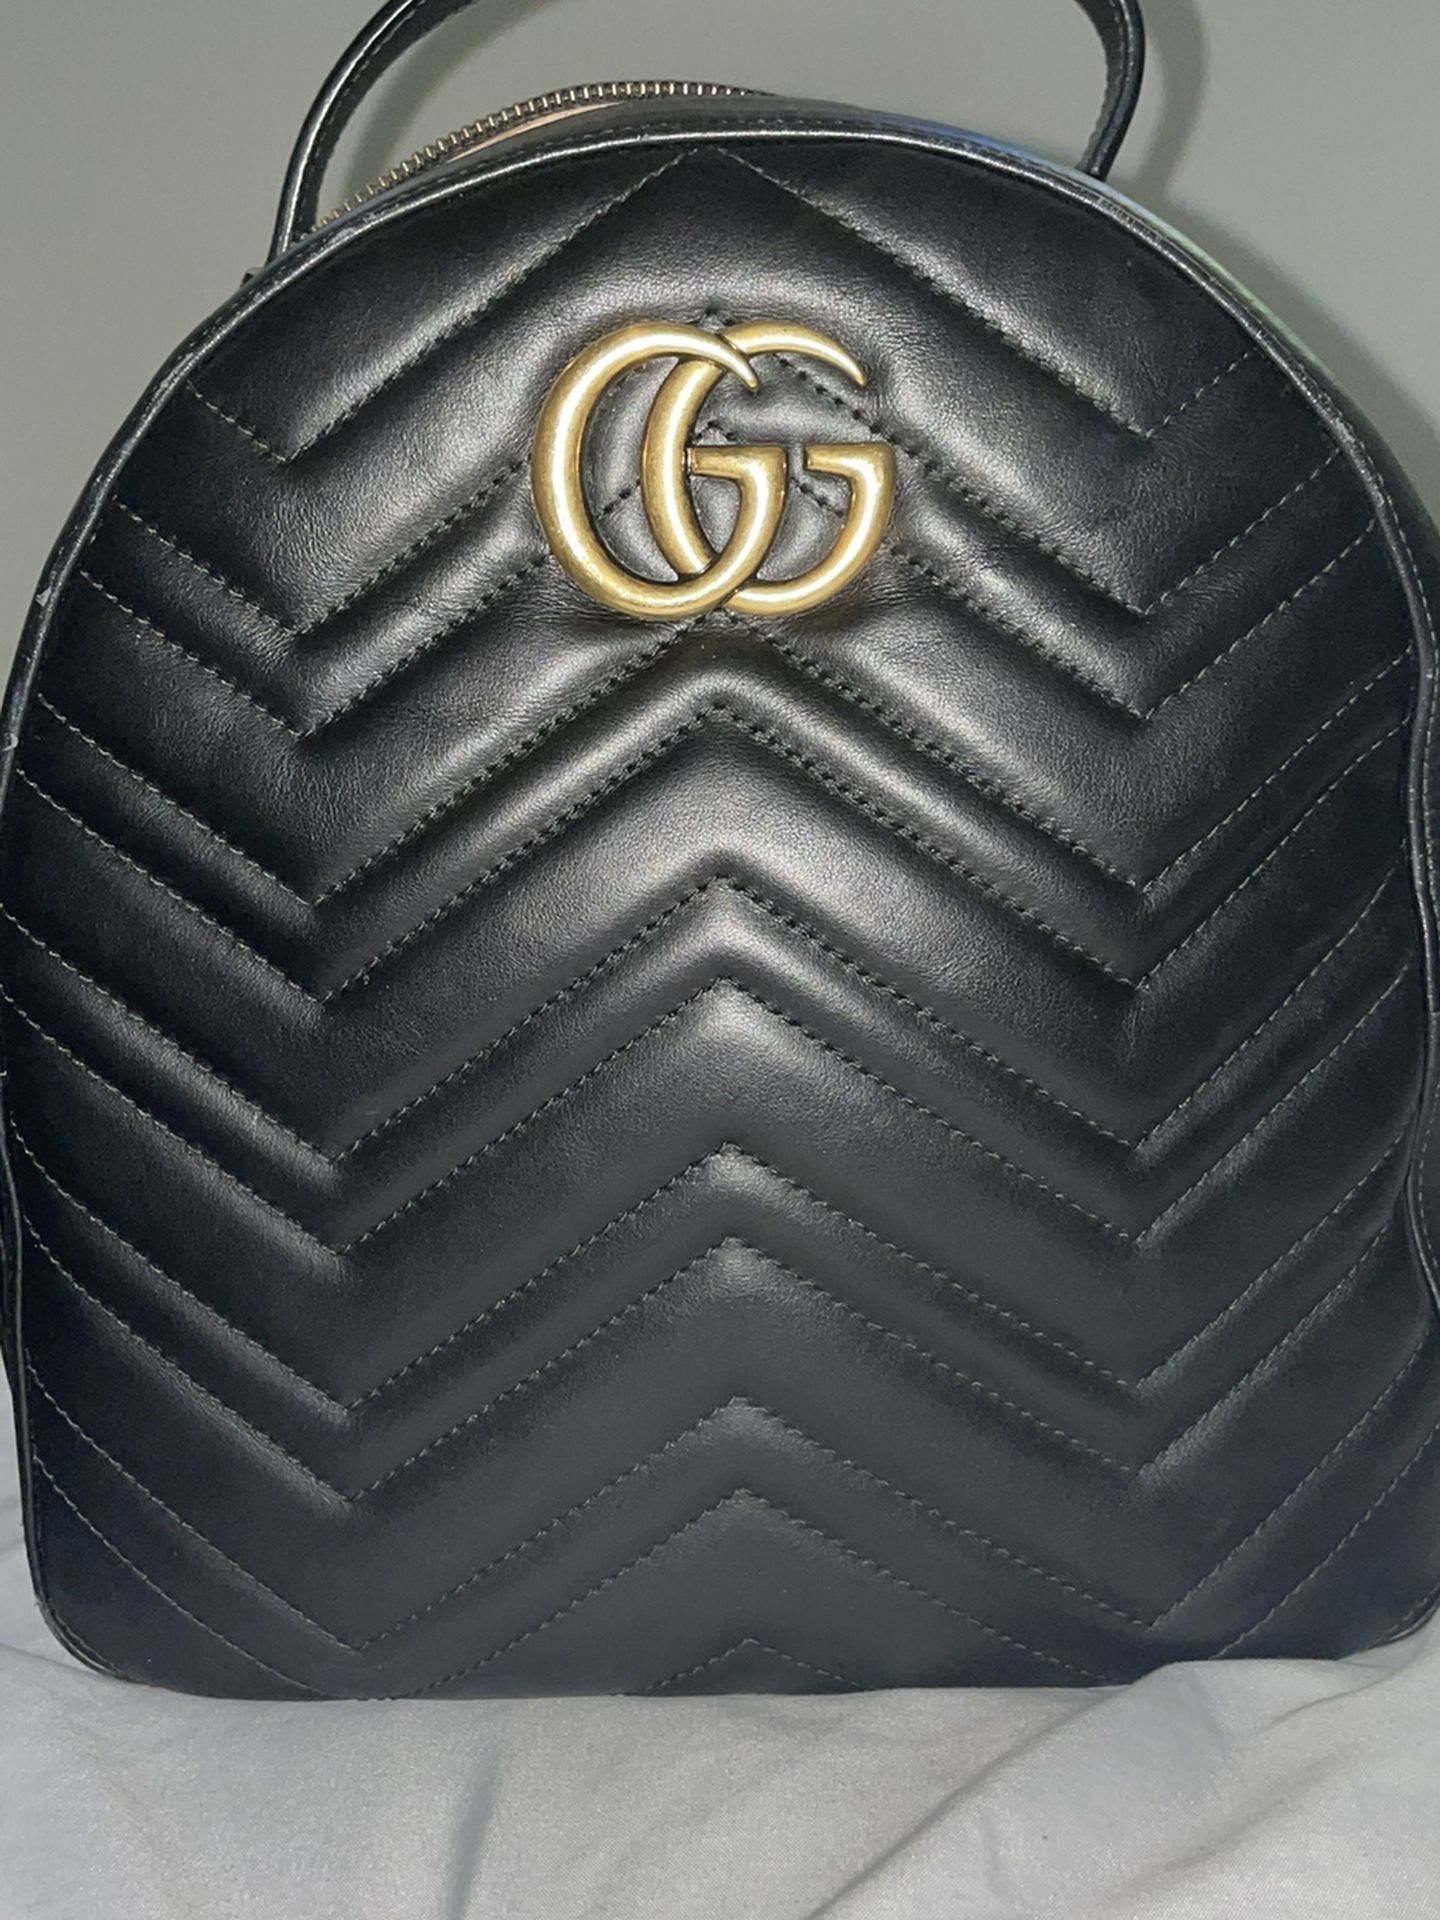 Gucci Bag for Sale with Gold Gs